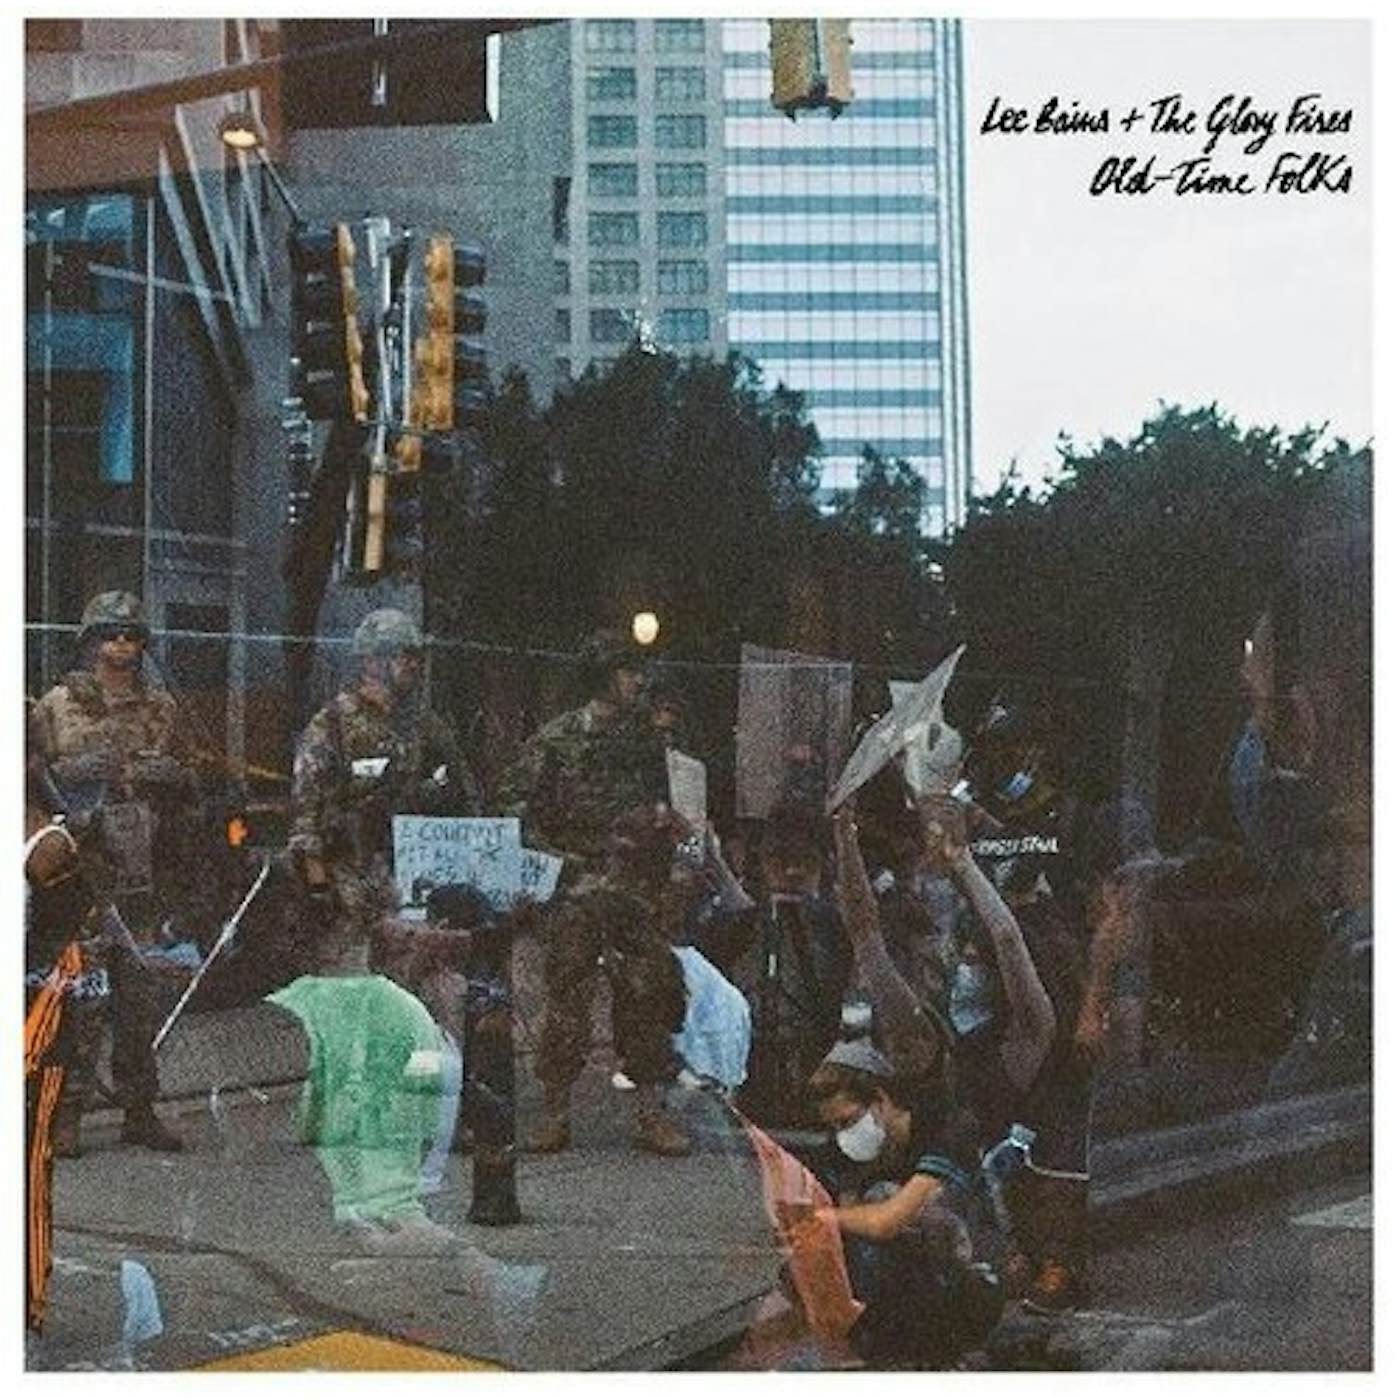 Lee Bains + The Glory Fires Old-Time Folks Vinyl Record